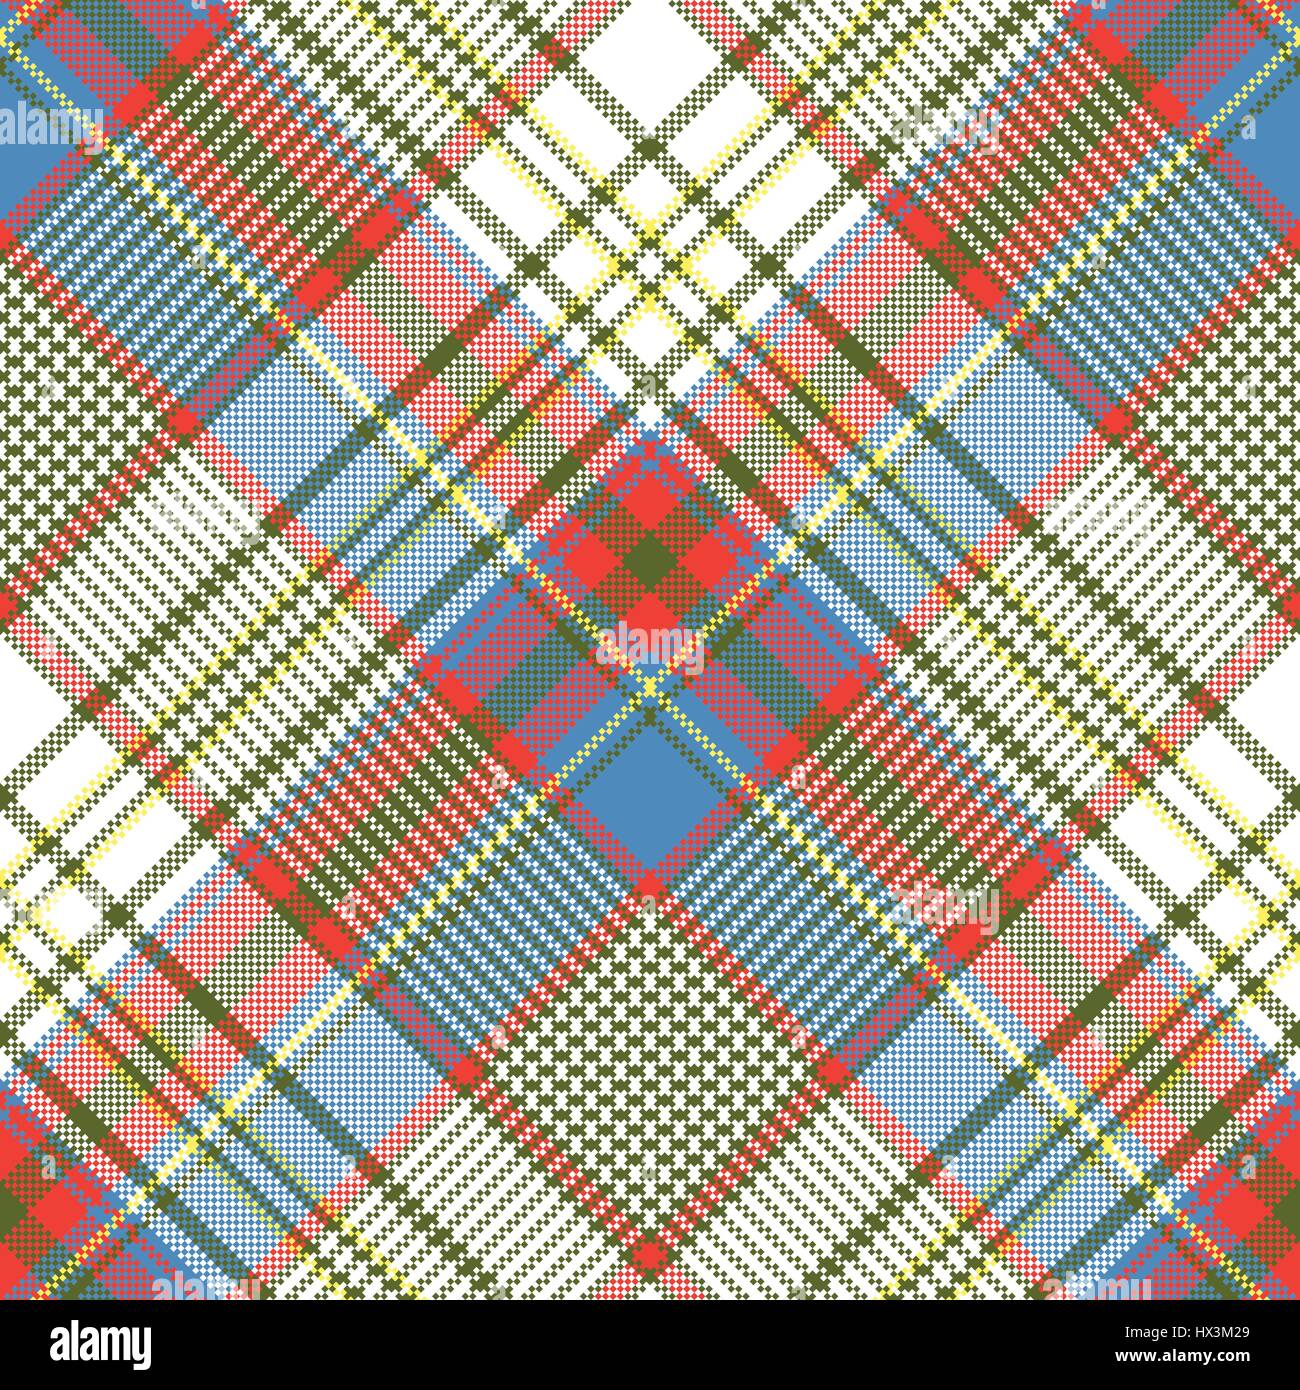 Plaid fabric texture square pixels shirt seamless pattern. Vector illustration. Stock Vector